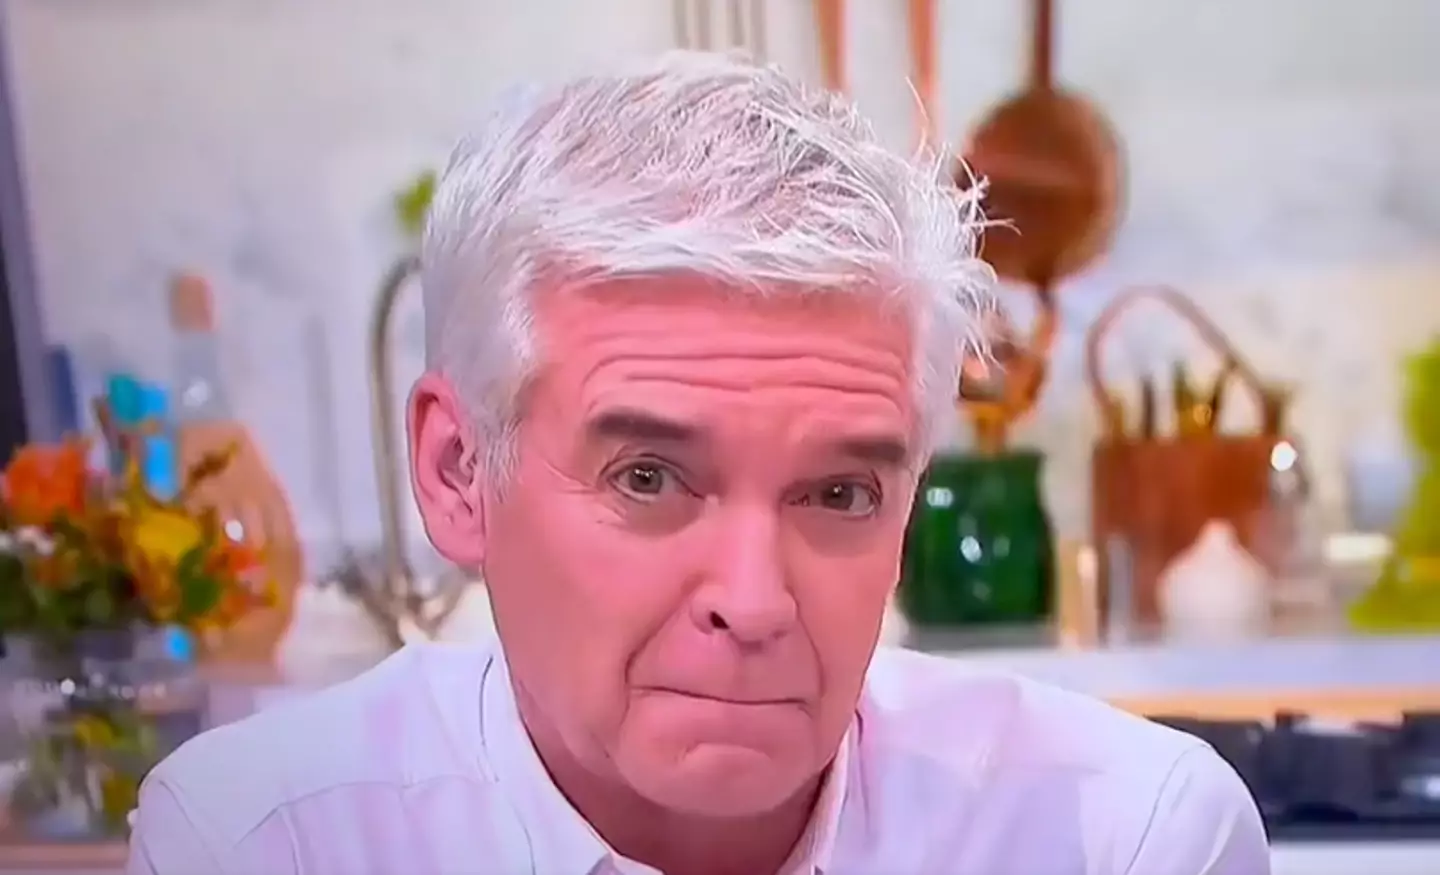 Phillip Schofield couldn't hide his disapproving and shocked expression.